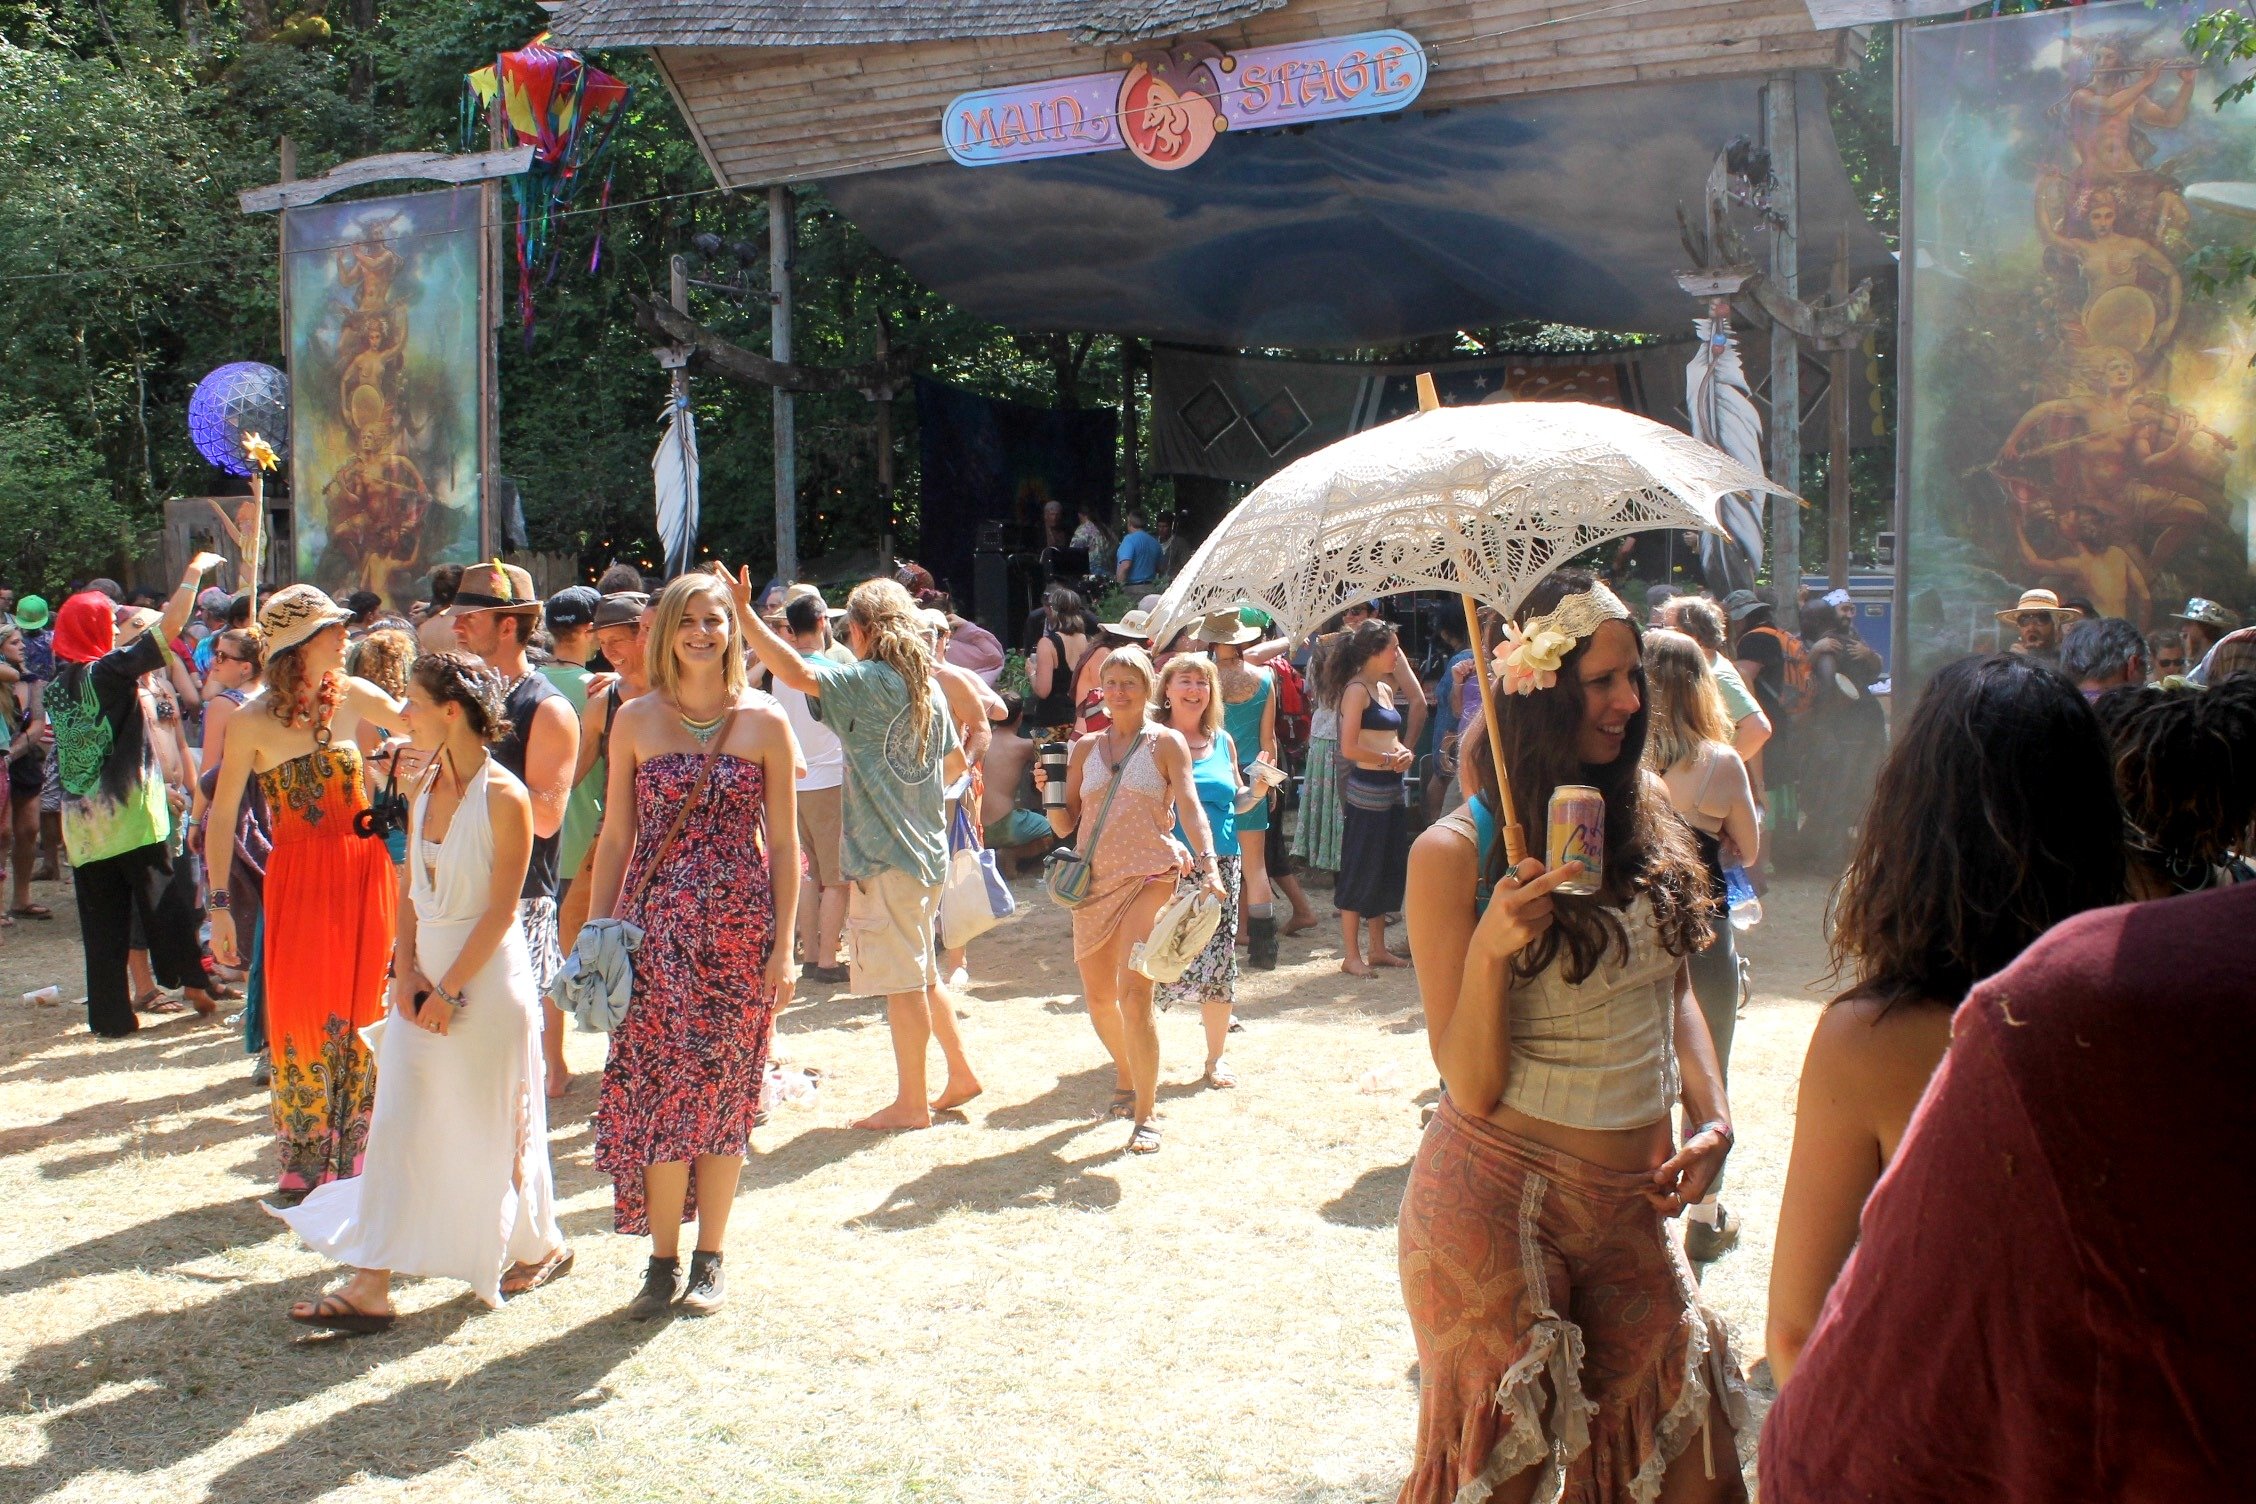 A complete guide to the Oregon Country Fair so you know what to expect, wha...